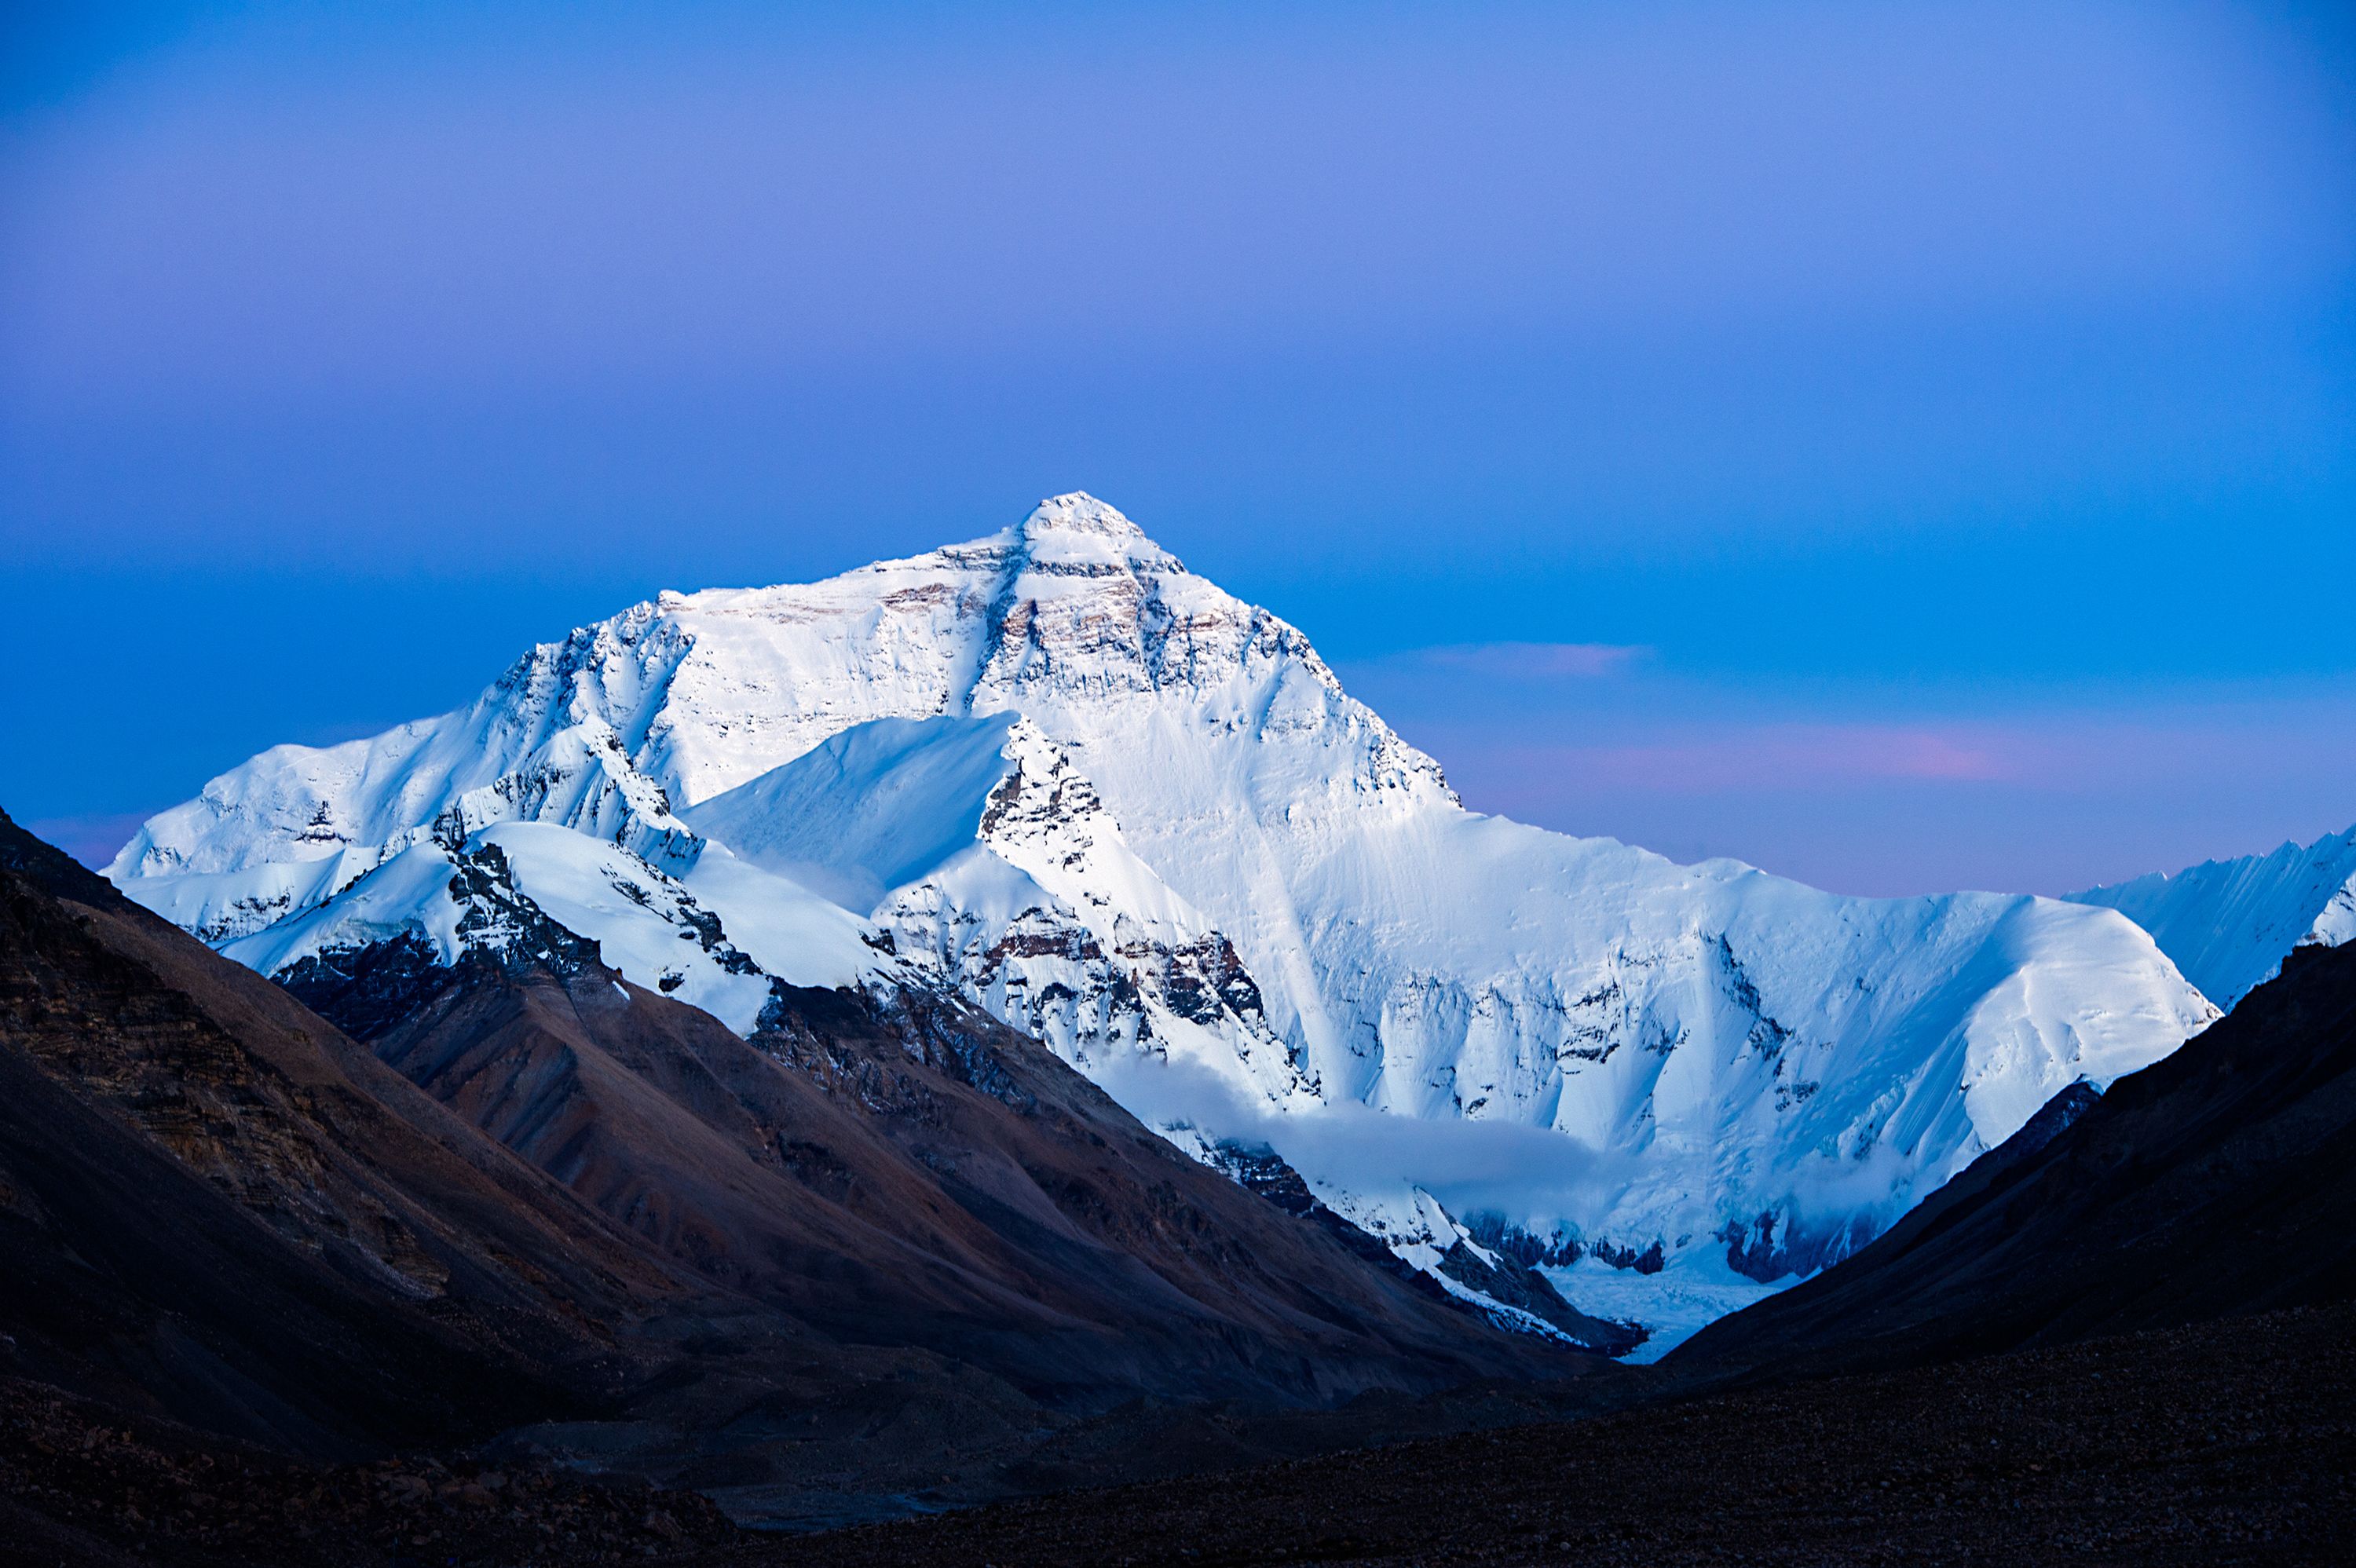 Mount Everest has lost 2,000 years' worth of ice in less than three decades